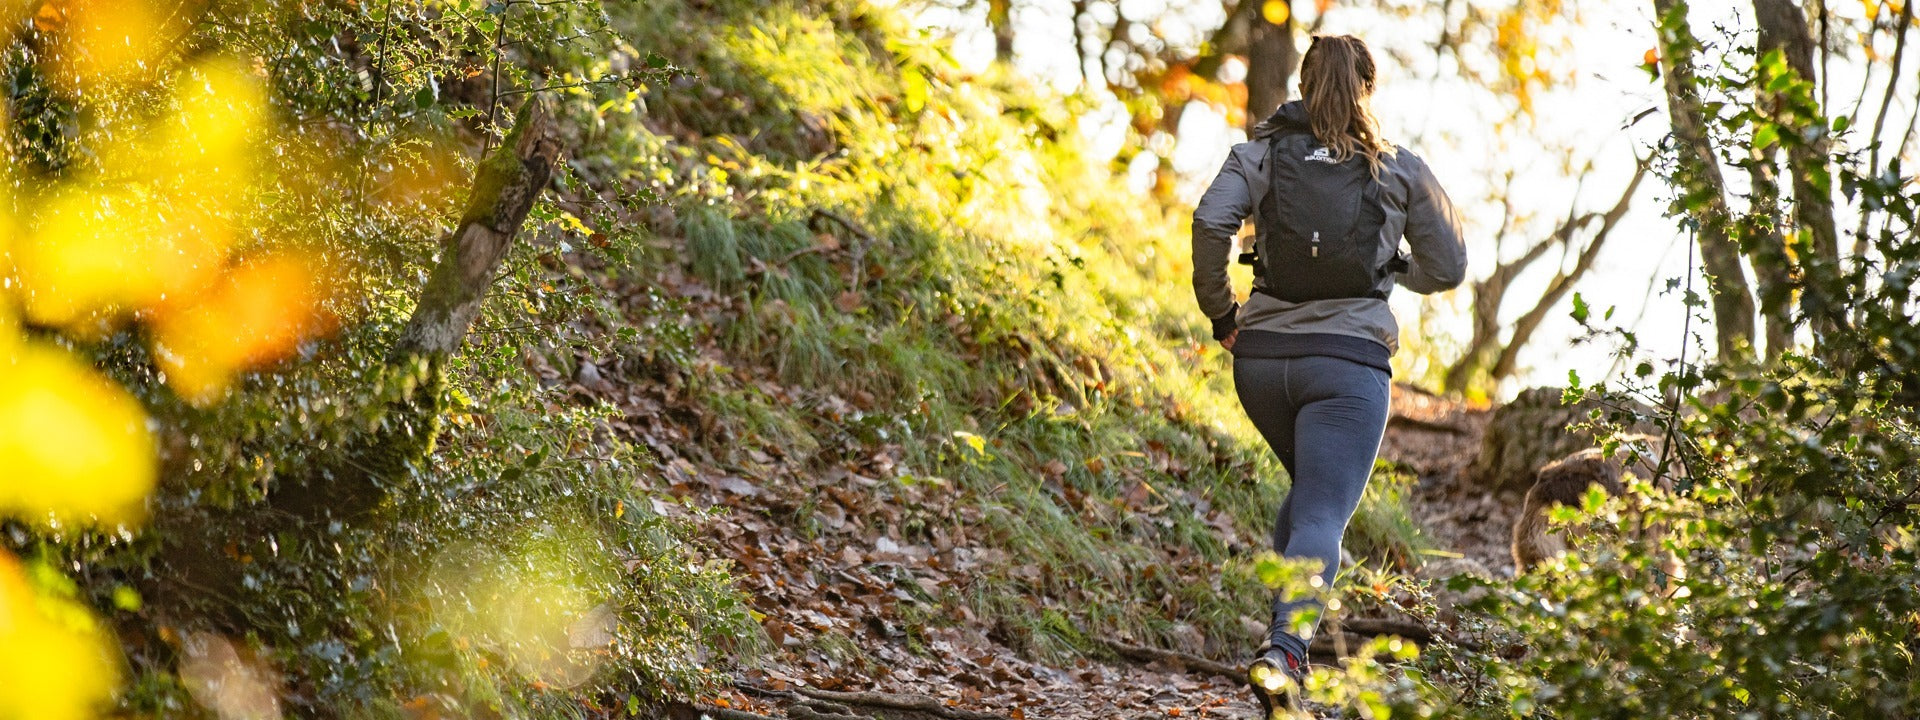 HOW TO CHOOSE A RUNNING BACKPACK